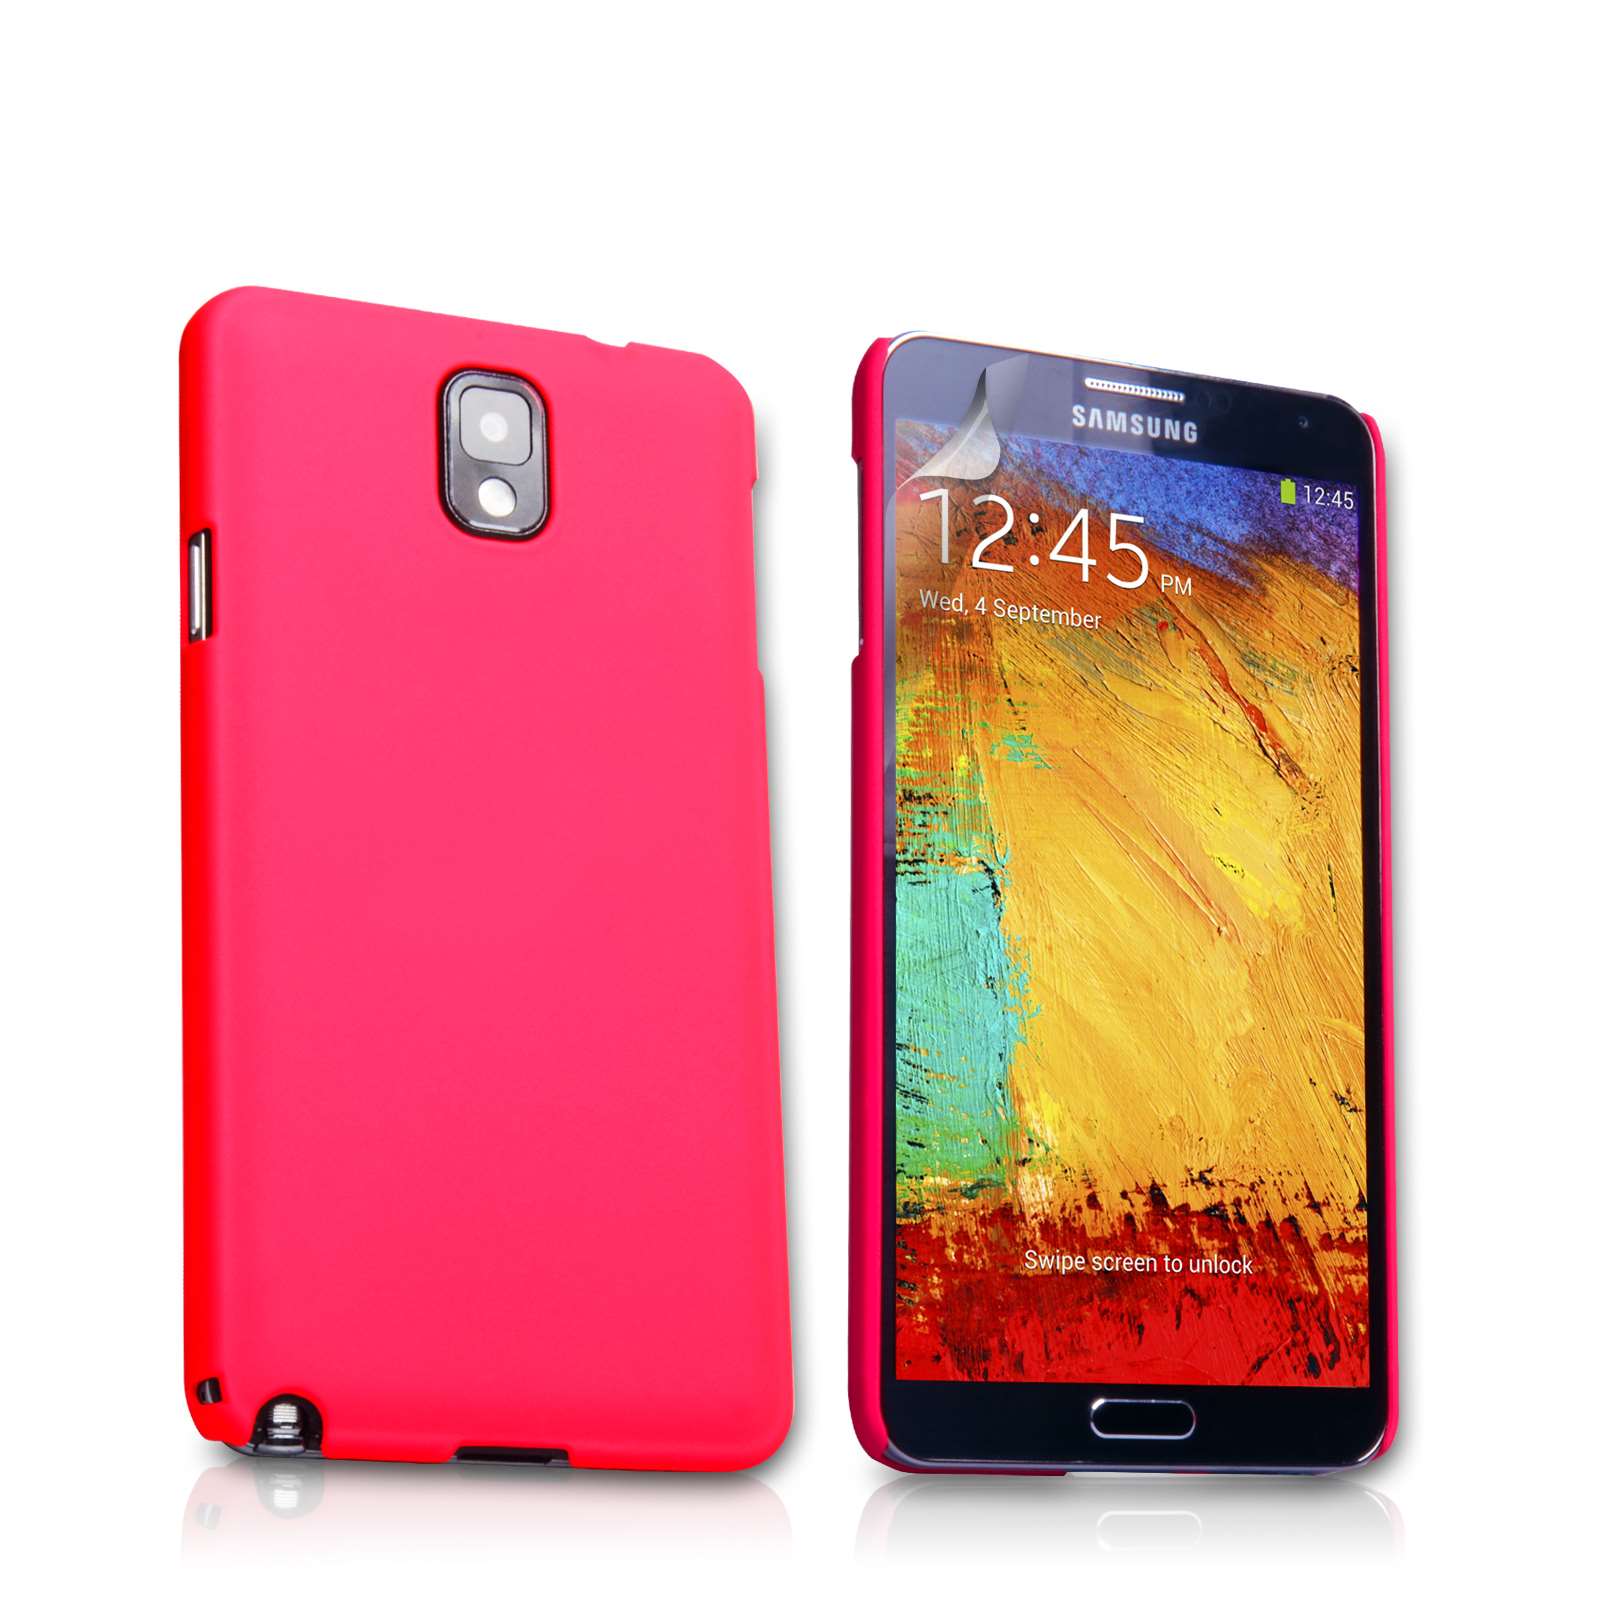 YouSave Samsung Galaxy Note 3 Hybrid Case - Hot Pink